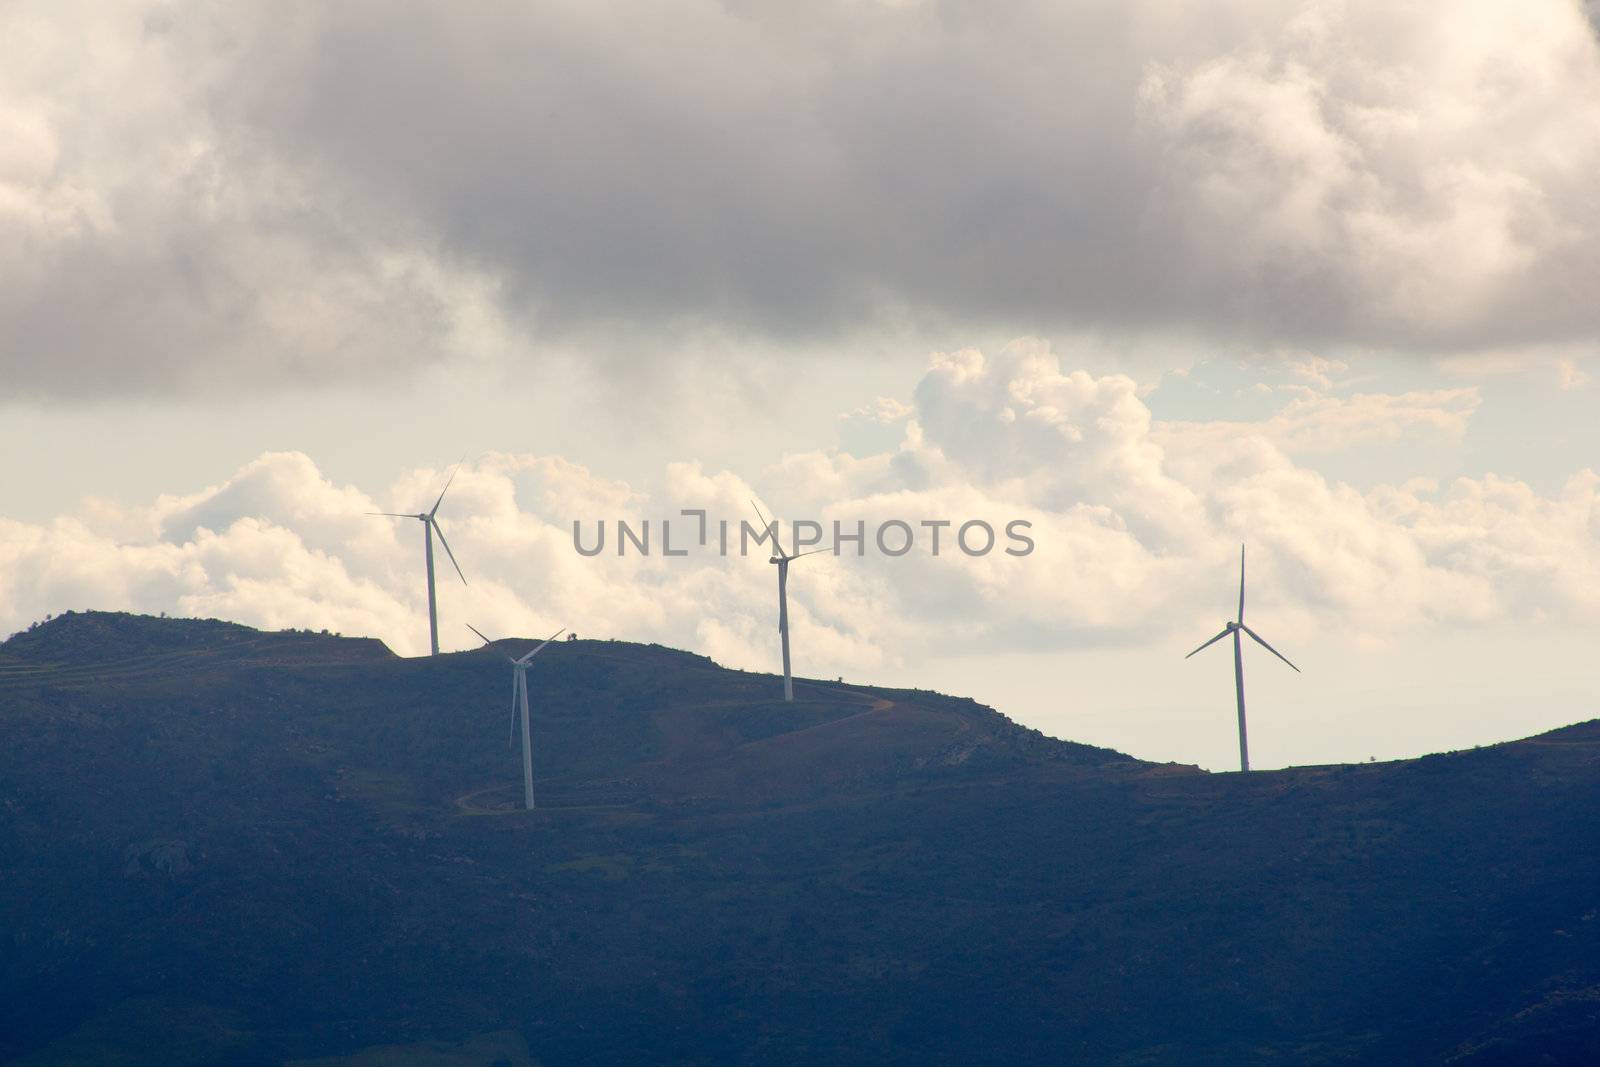 View of Wind turbines in the mountain with clouds